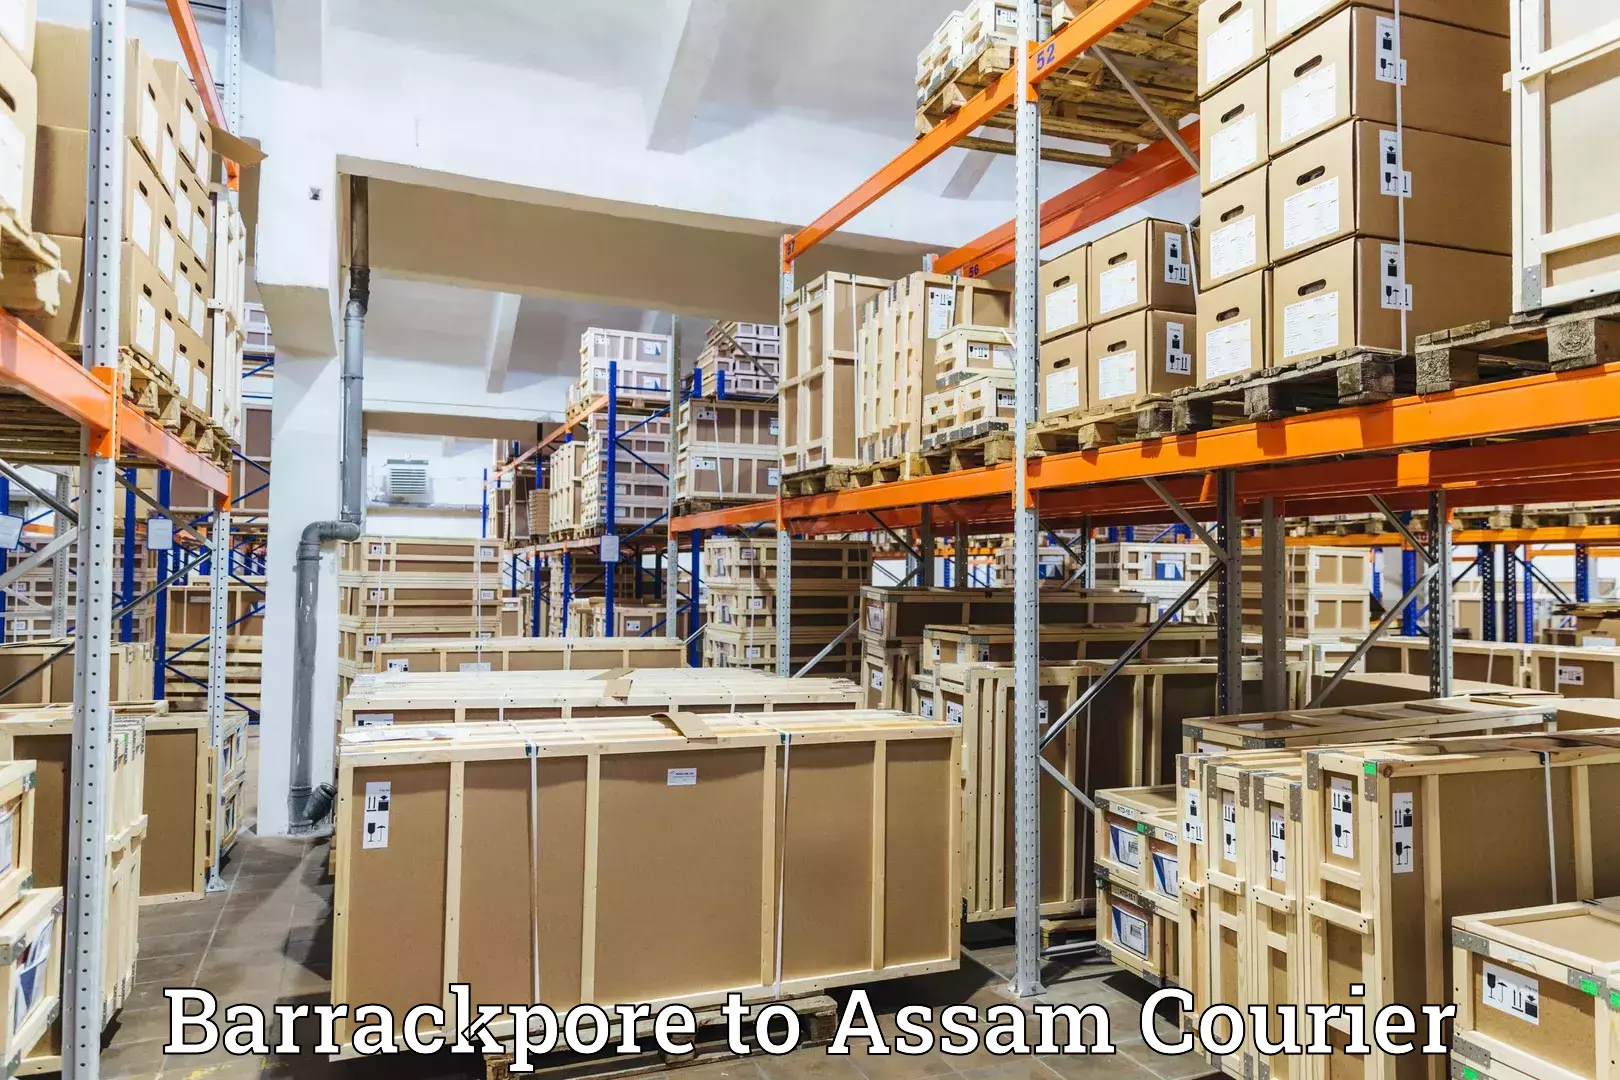 Expedited shipping methods Barrackpore to Lala Assam